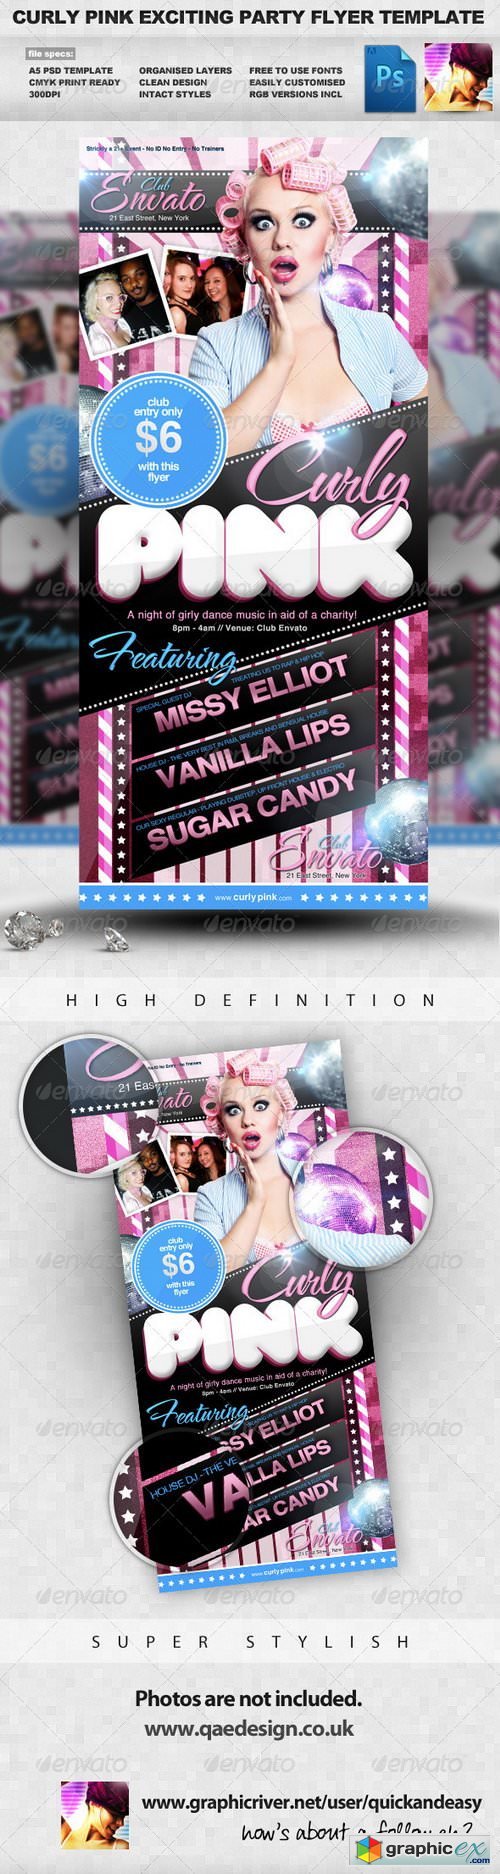 Curly Pink Exciting Club Party Flyer Template